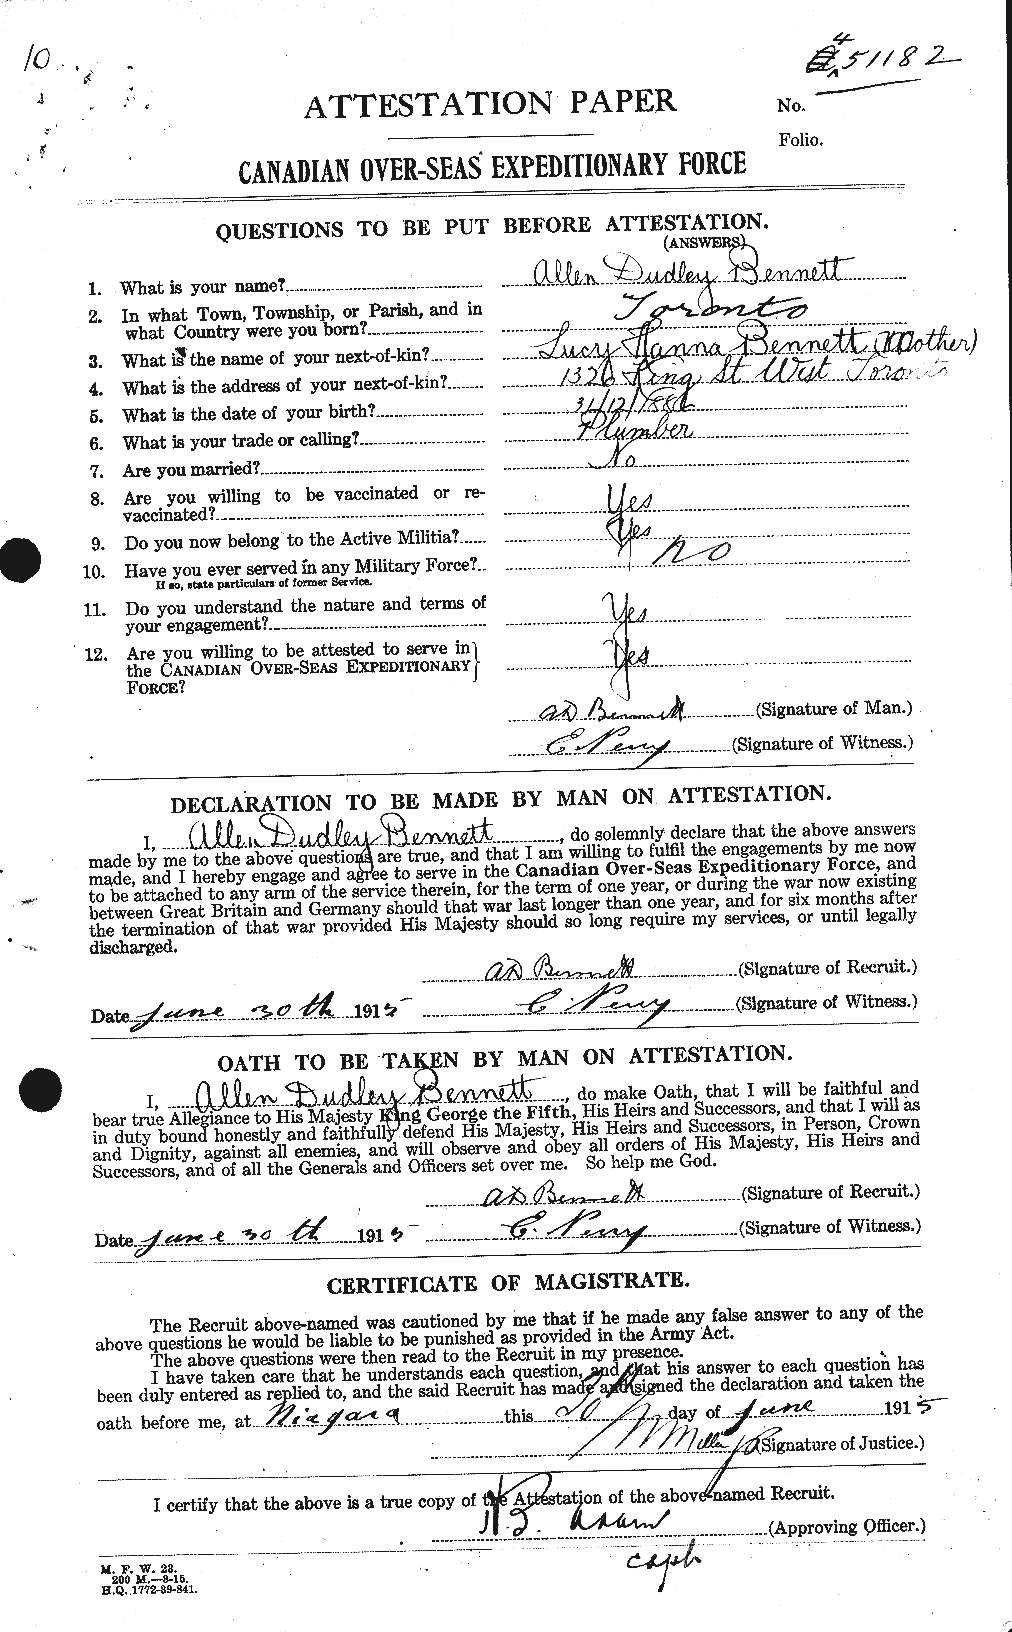 Personnel Records of the First World War - CEF 233310a